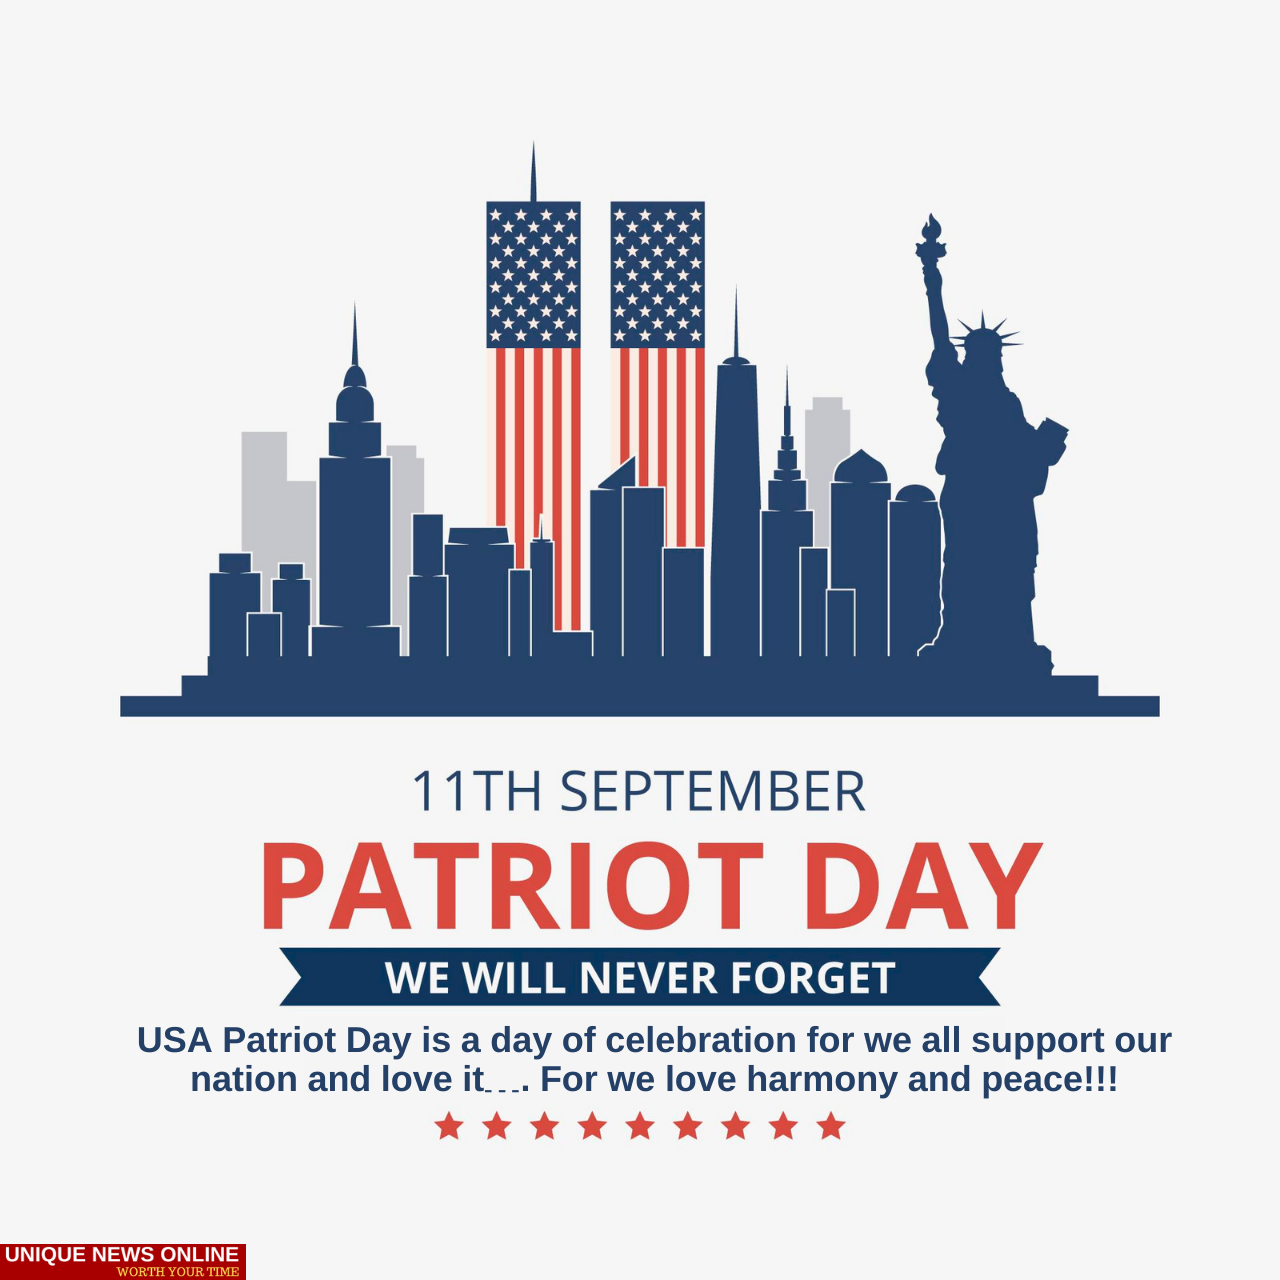 Patriot Day USA 2021: Quotes, Images, Sticker, Messages, Meme, Sayings, Slogan, and Banner to observe the 20th anniversary of 9/11